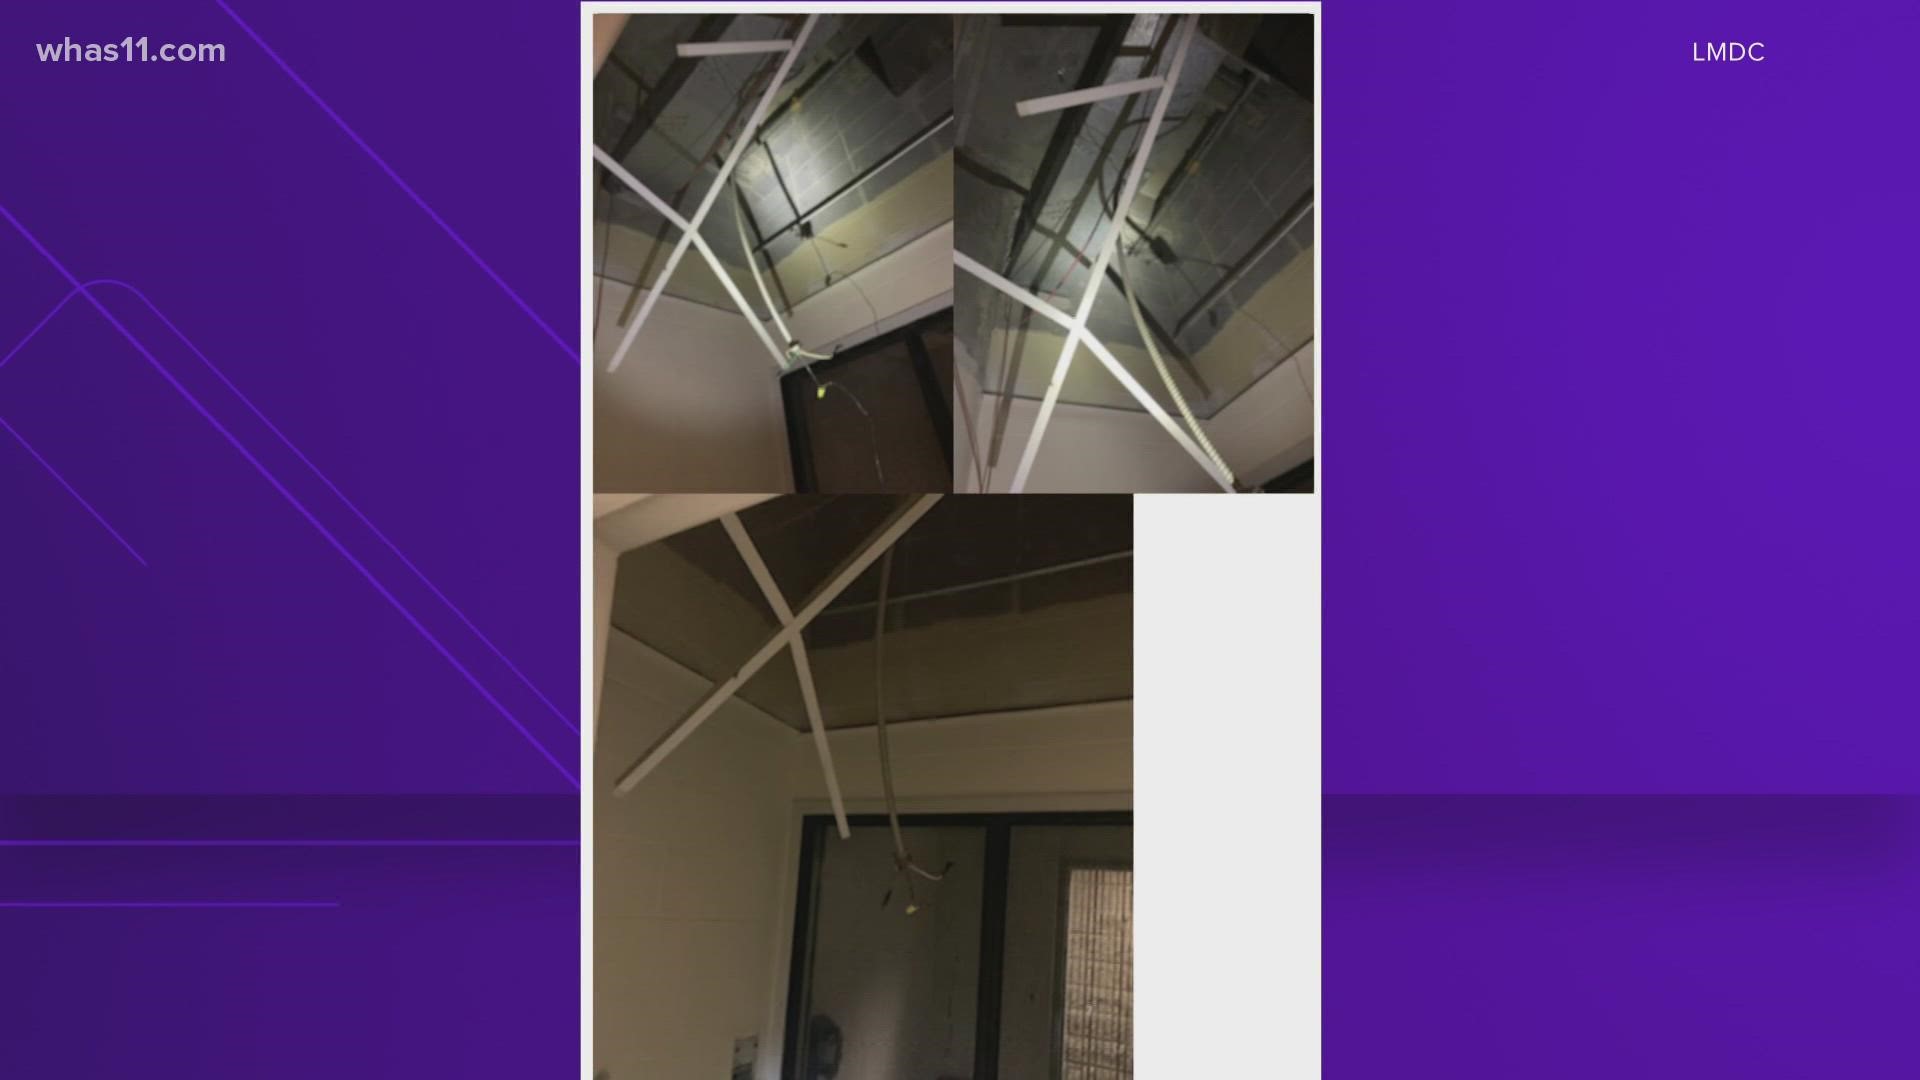 According to an arrest citation, Kenneth Hackney was placed in a temporary holding booth. While he was there he tried to climb through the ceiling.